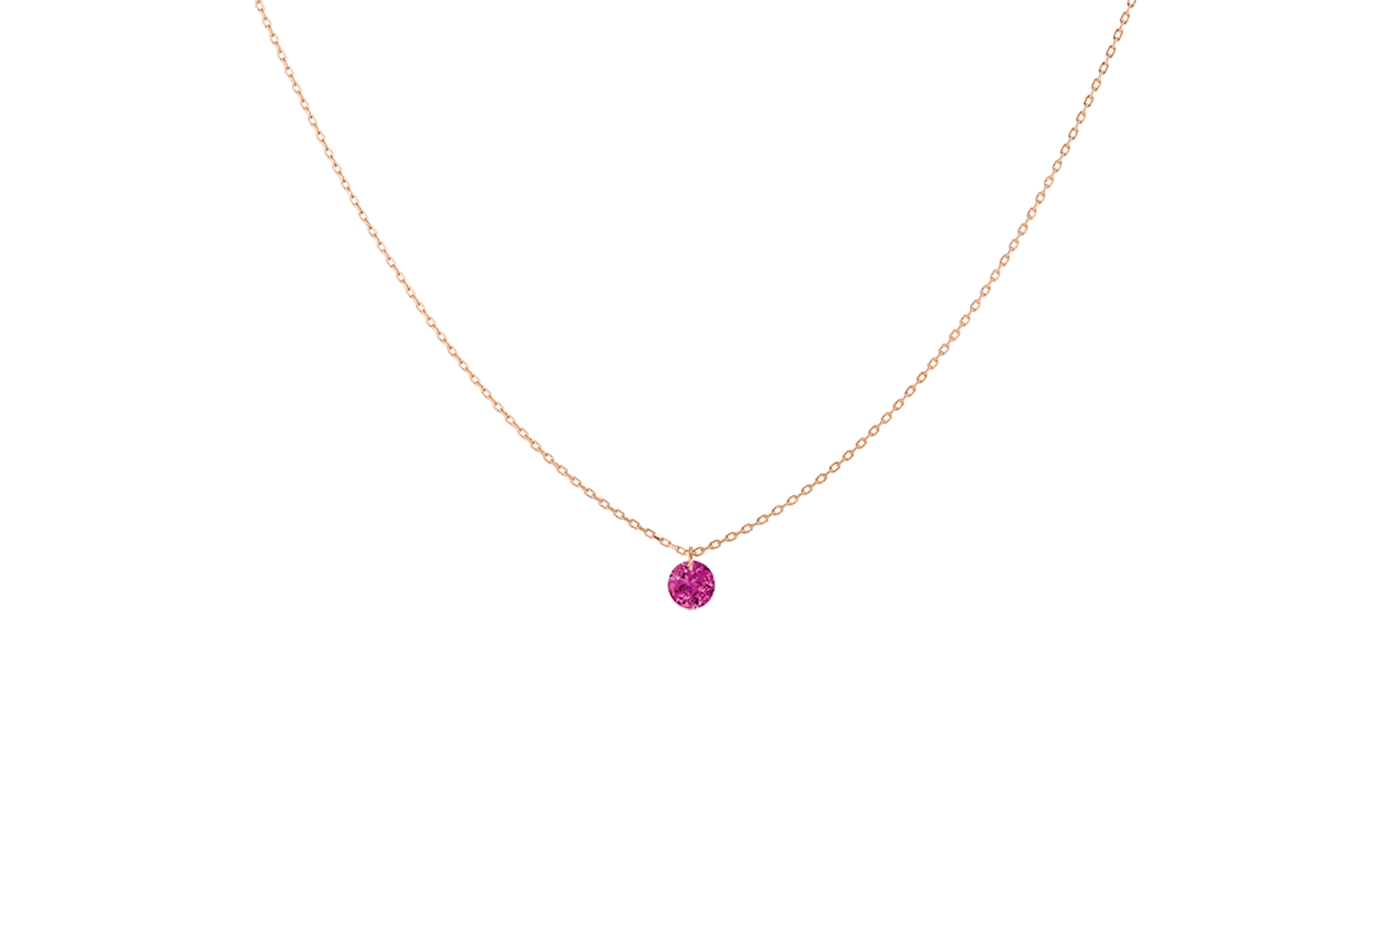 Collier CONFETTI, rubis, Rond 4mm, 0,30 ct approx., or rose 18KT, 1gr.